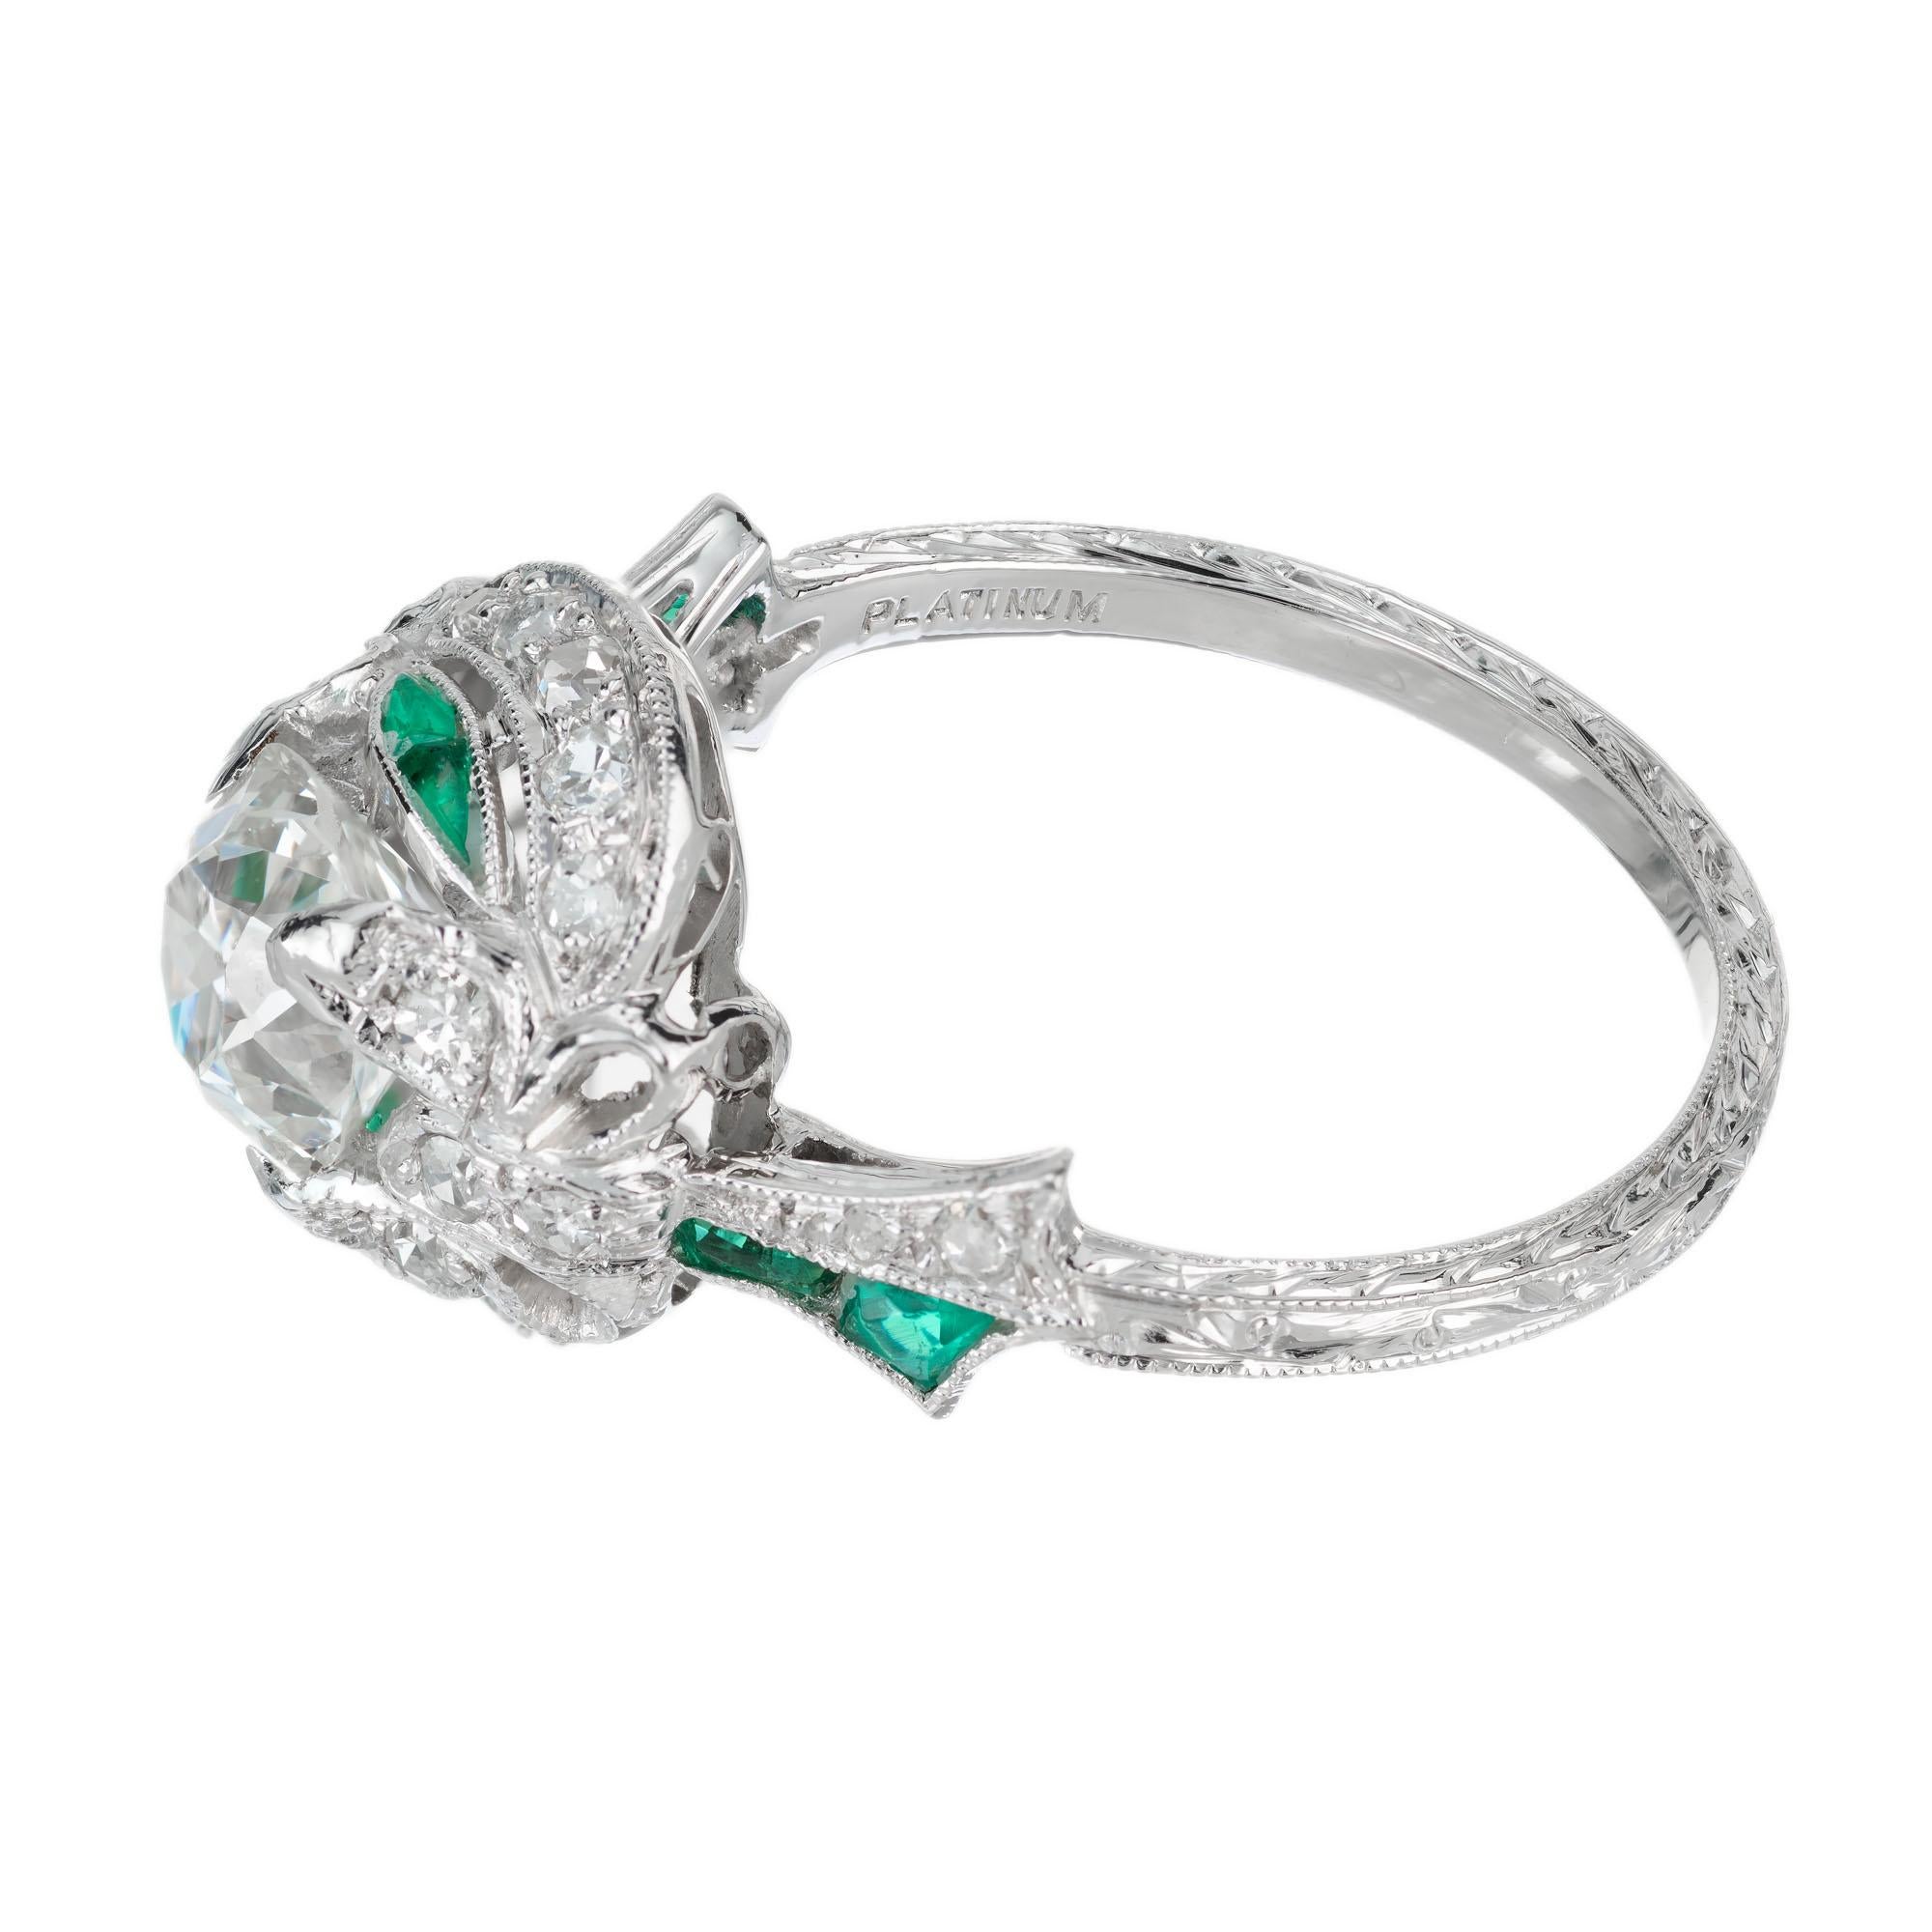 GIA Certified 1.33 Carat Diamond Emerald Platinum Engagement Ring In Good Condition For Sale In Stamford, CT